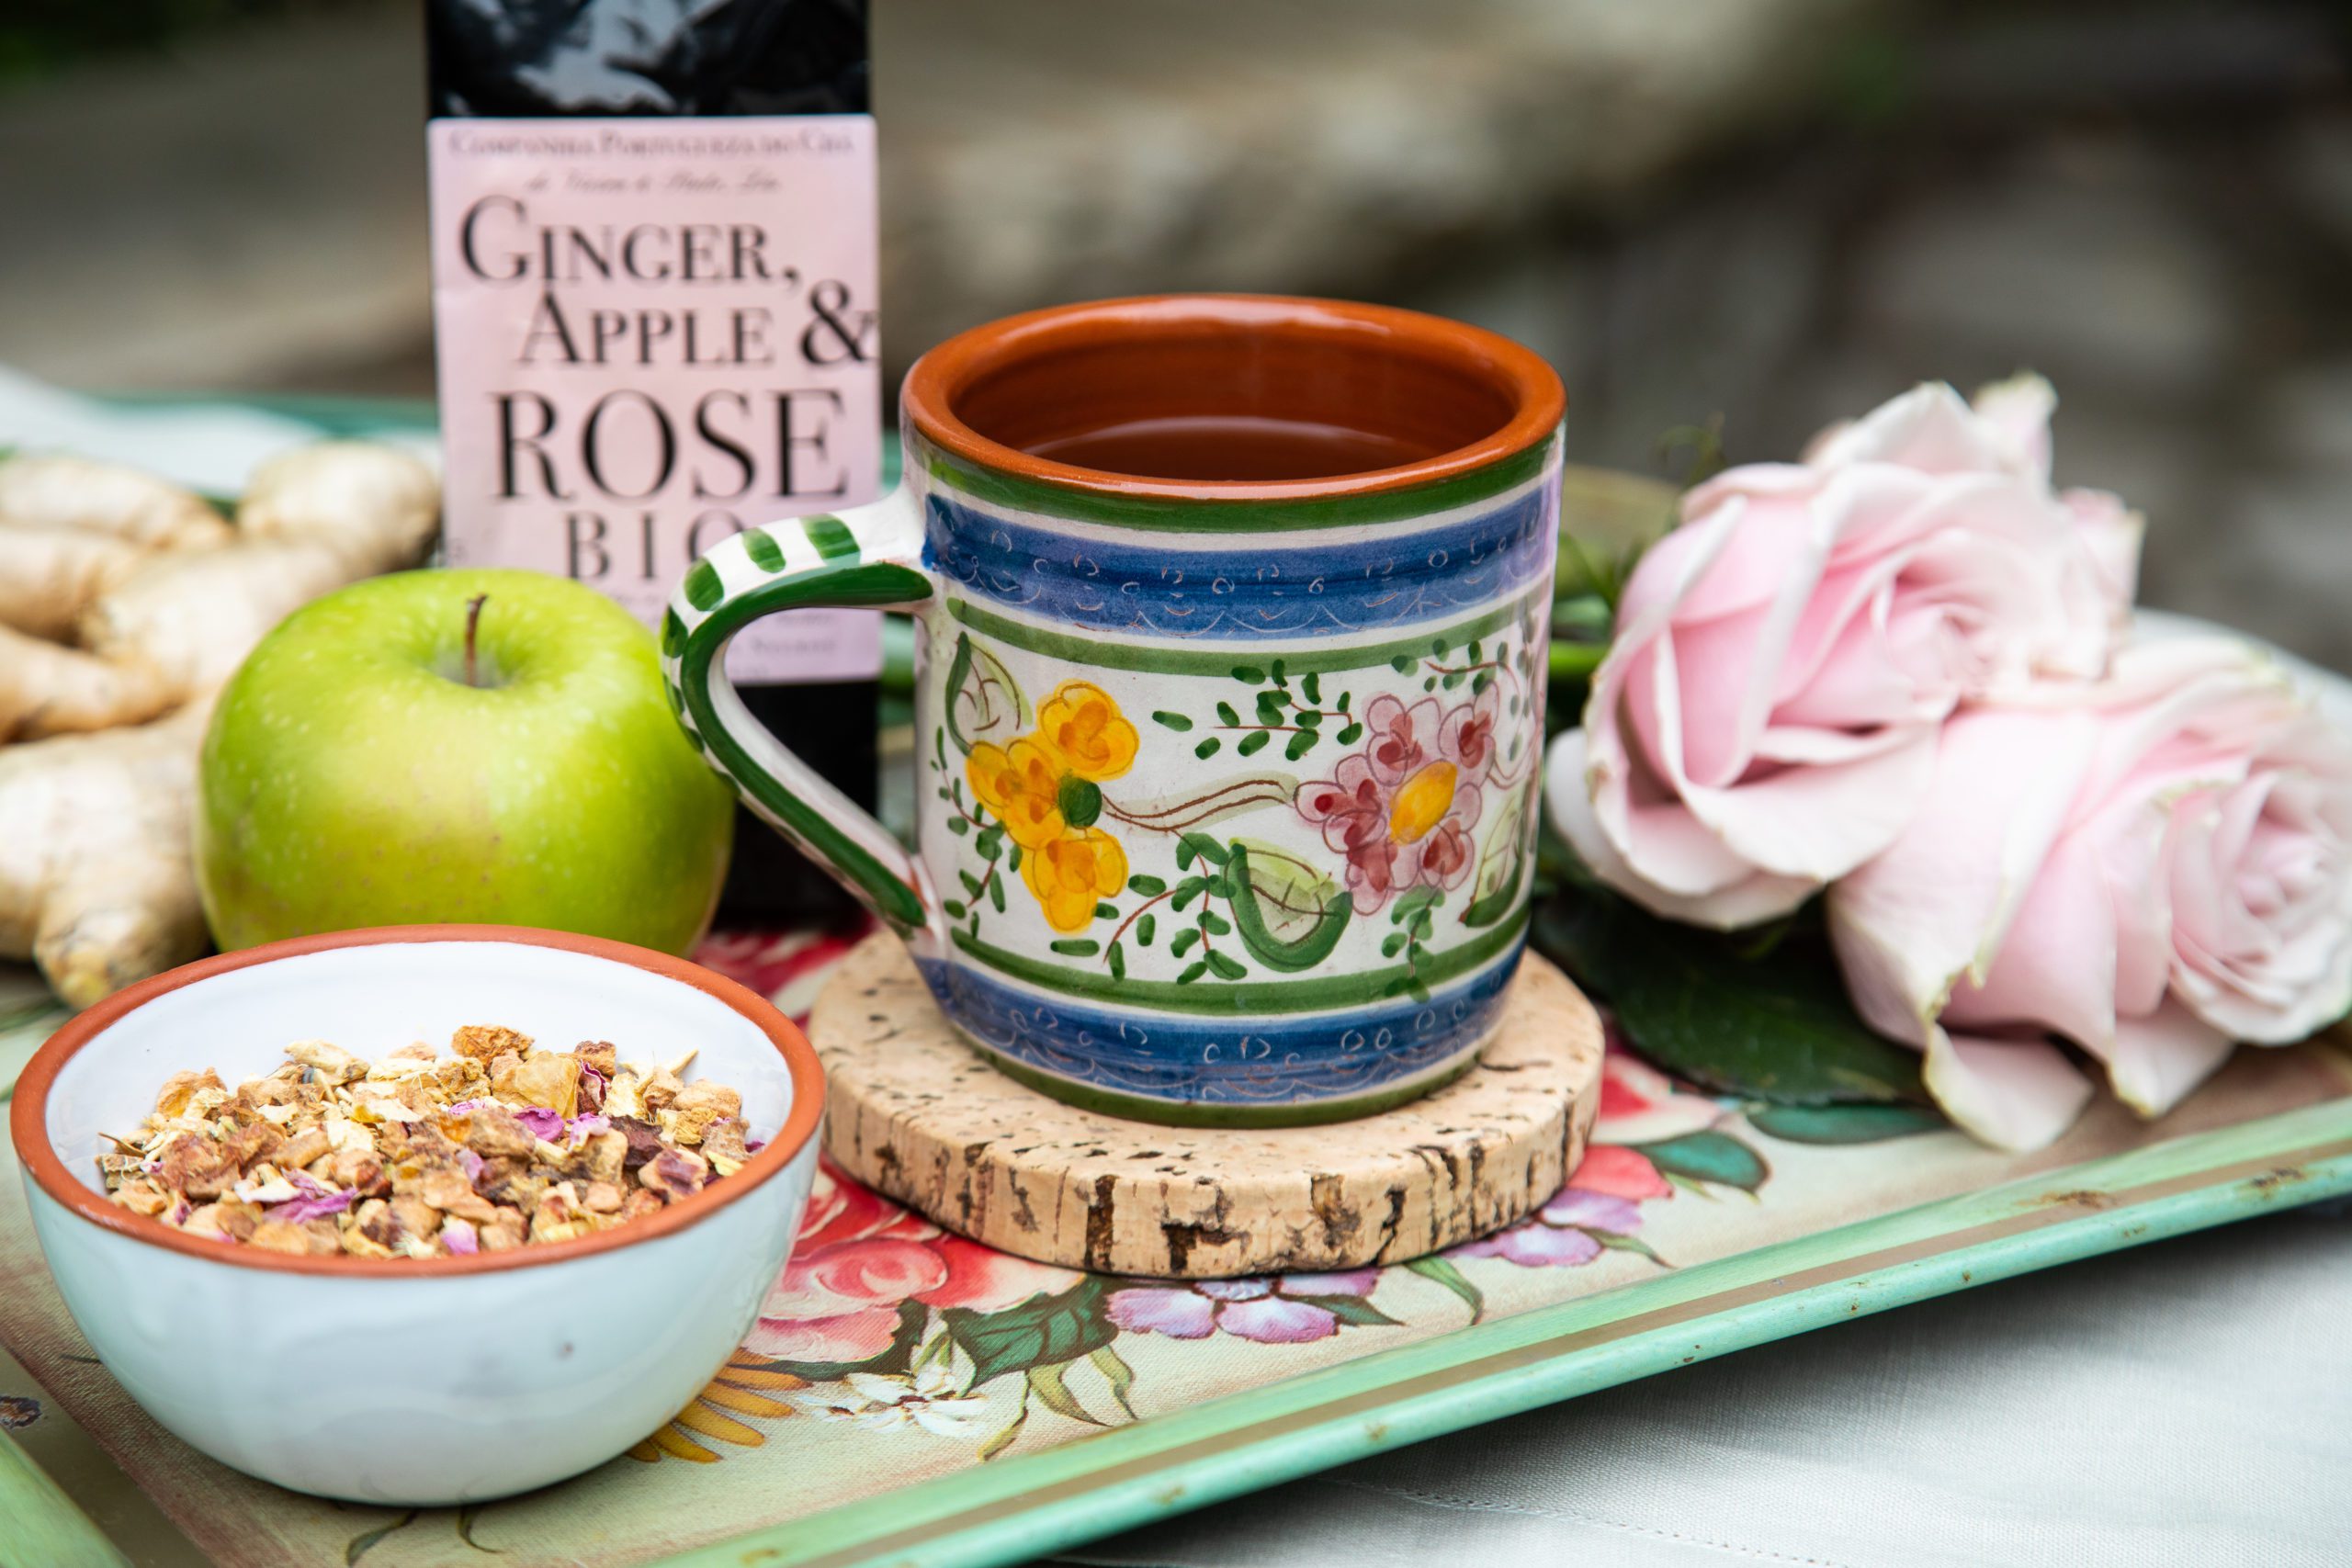 Ginger, Apple and Rose Tea